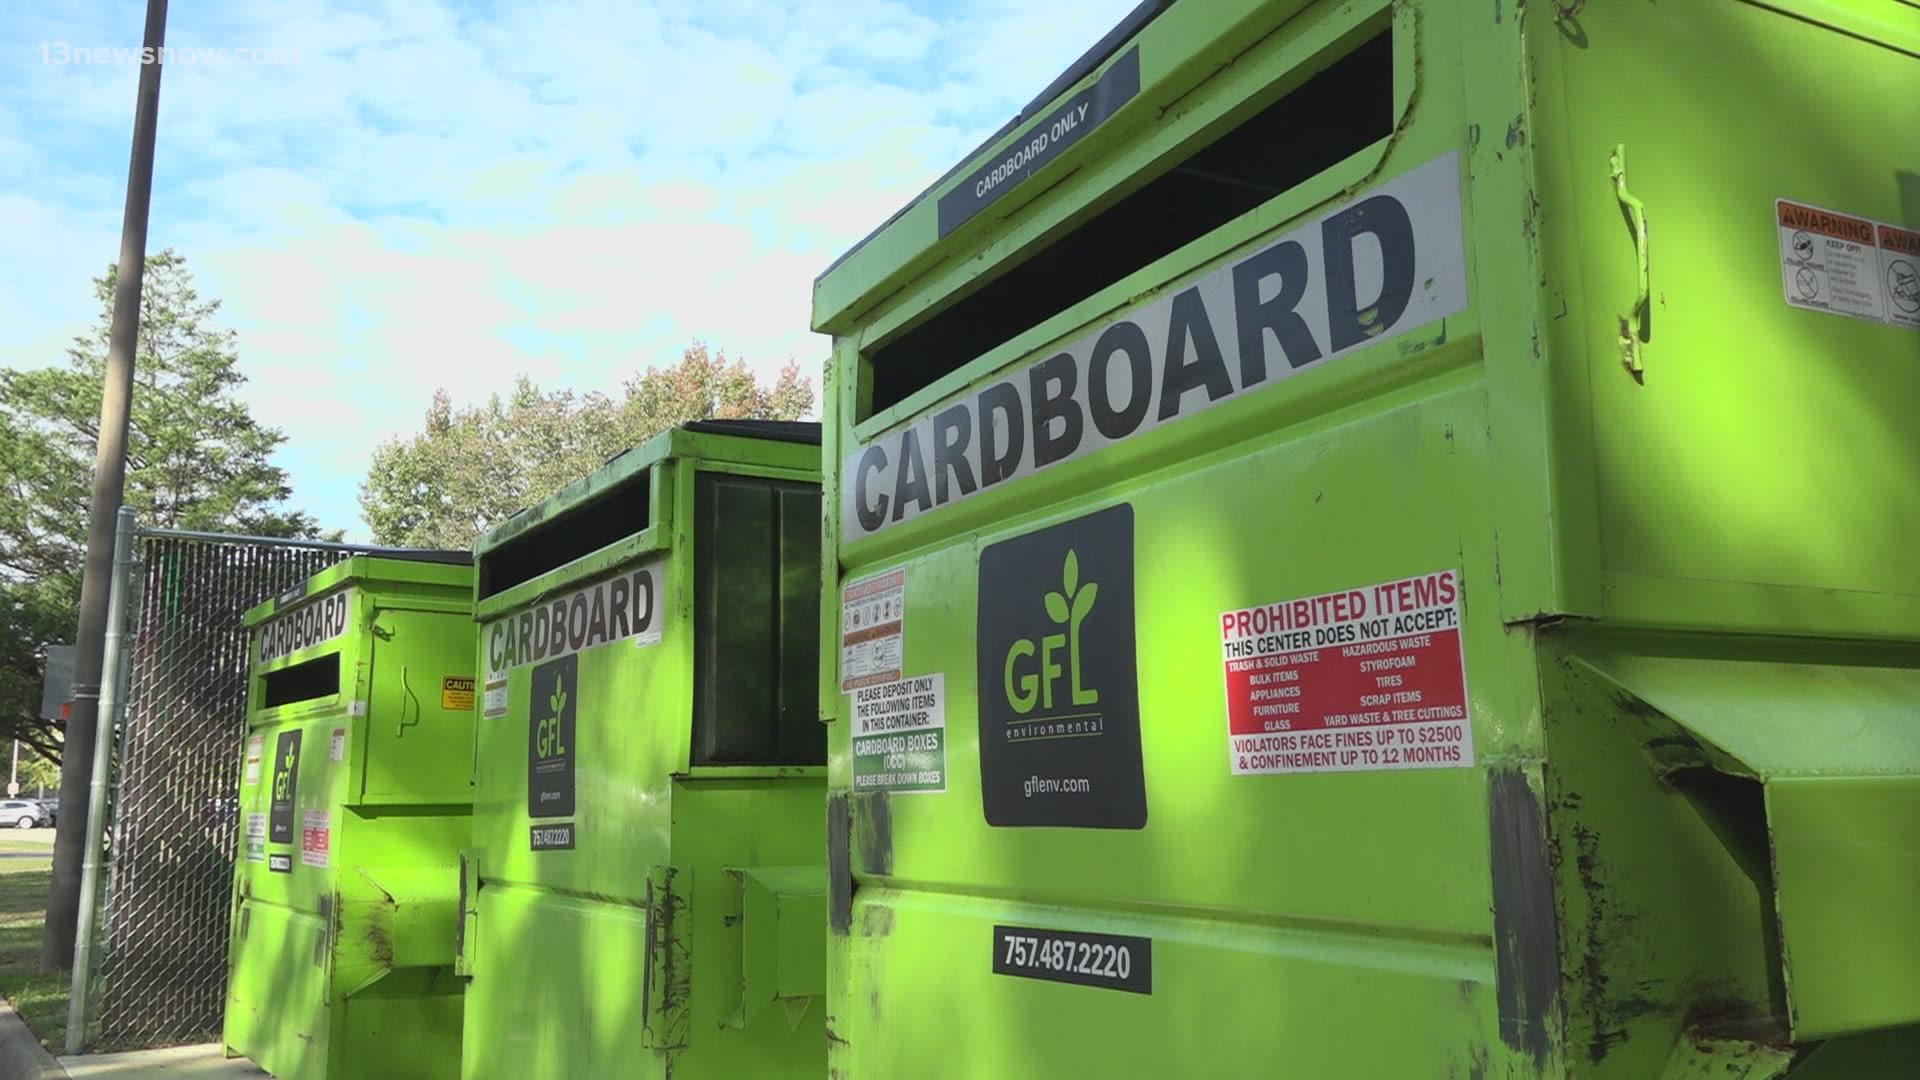 Chesapeake officials ended curbside recycling services after City Council members voted to cancel the contract with TFC Recycling. Many residents want it back.